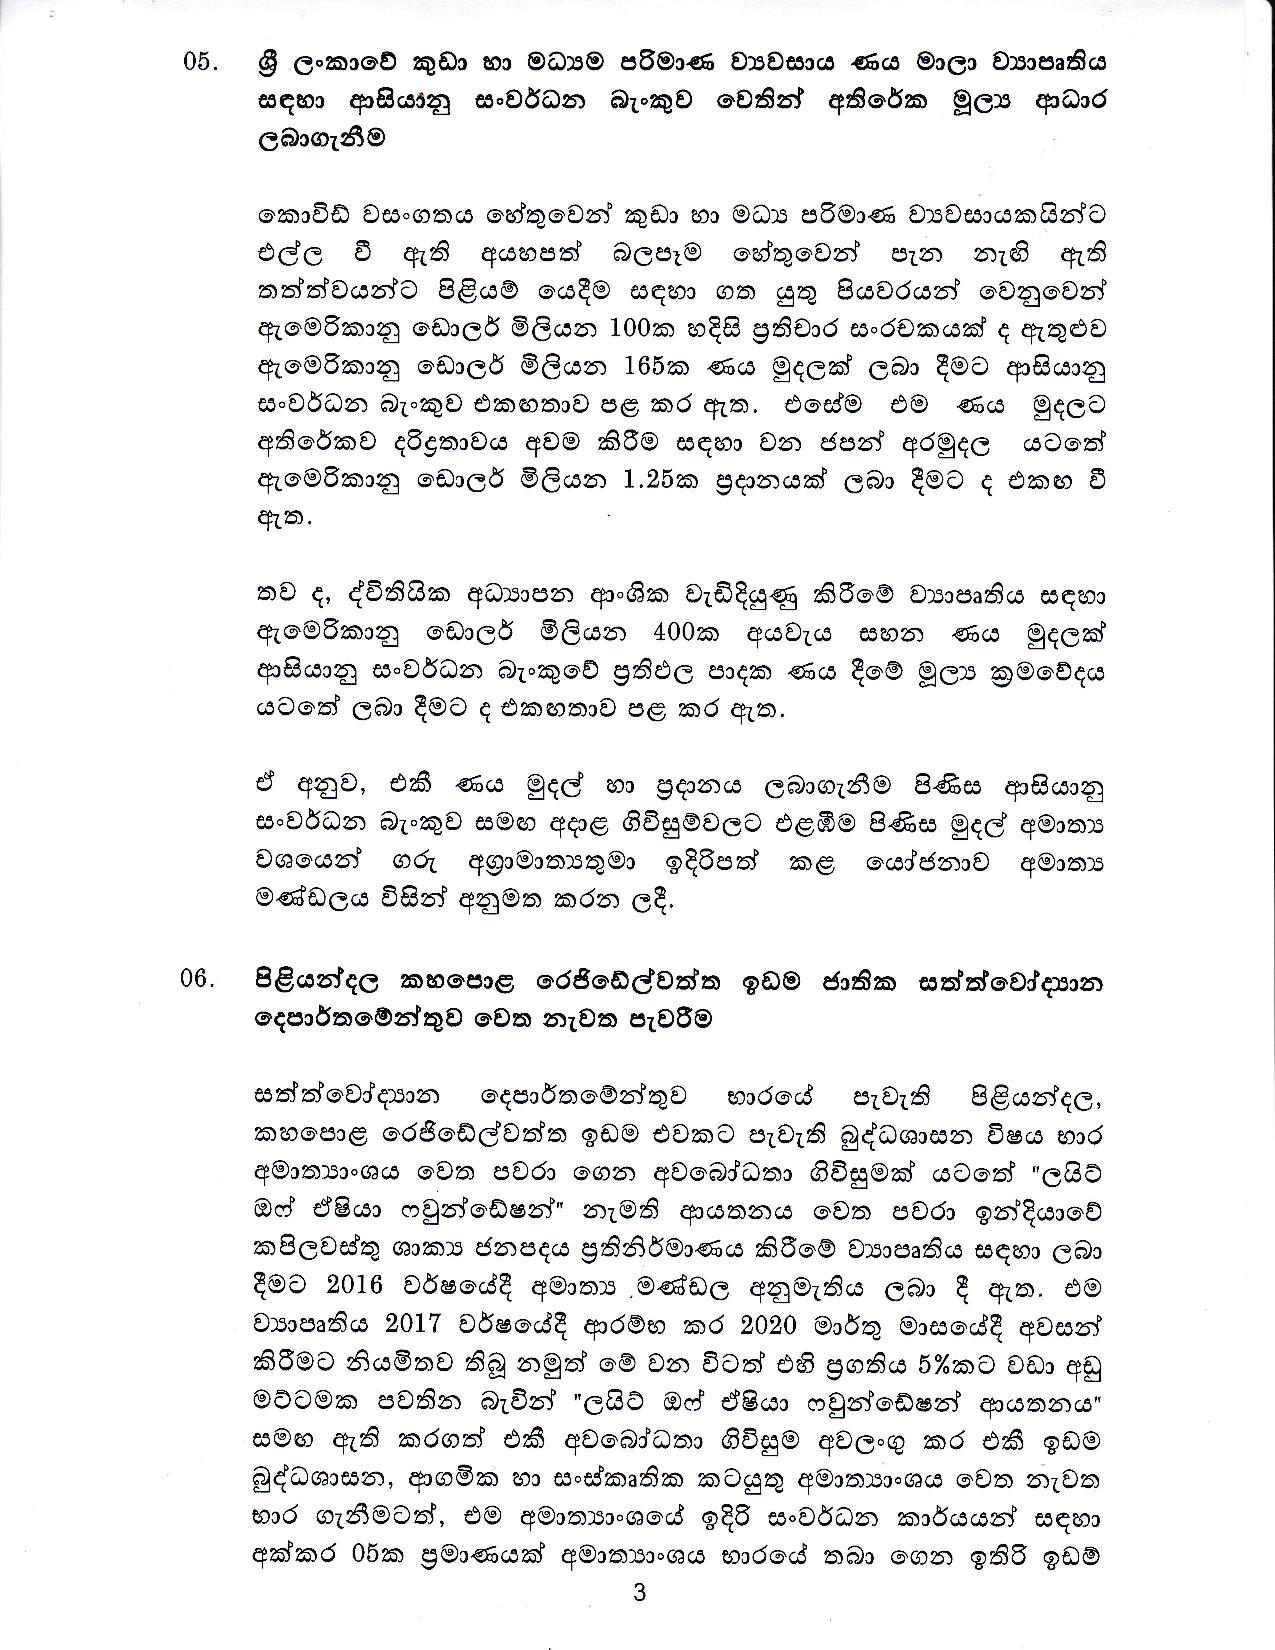 Cabinet Decision on 26.10.2020 page 003